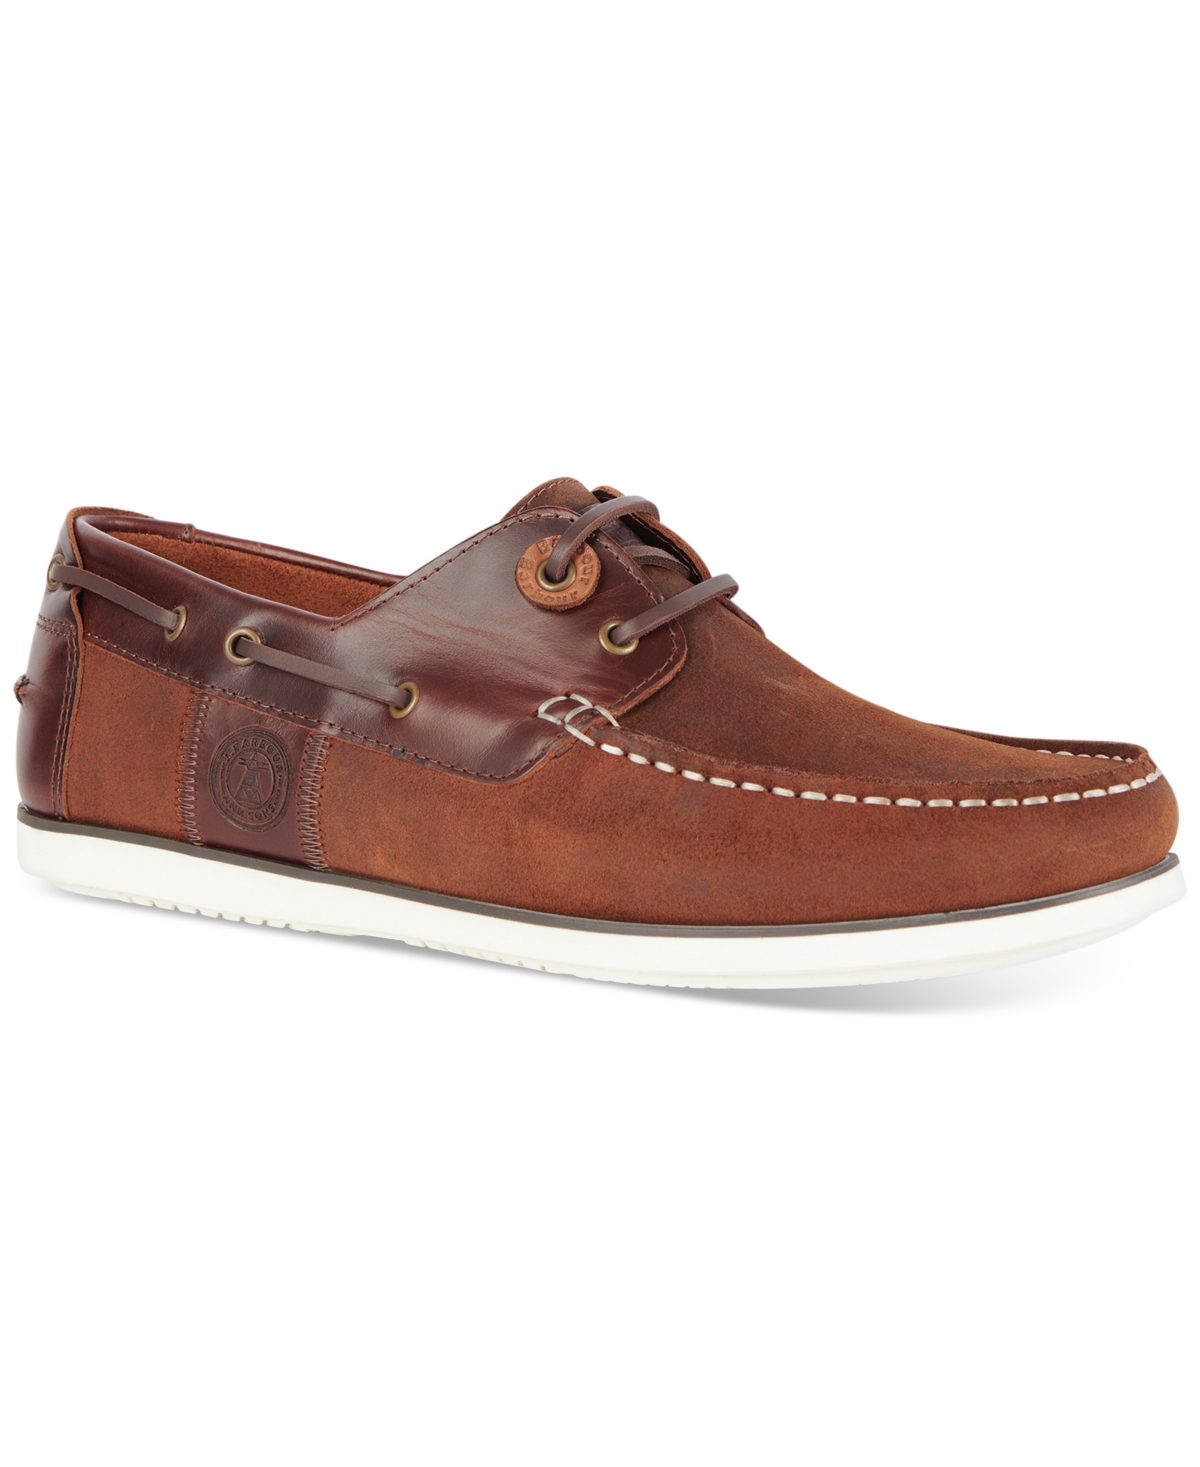 Barbour Men's Leather & Suede Wake 2-eye Boat Shoes In Beige